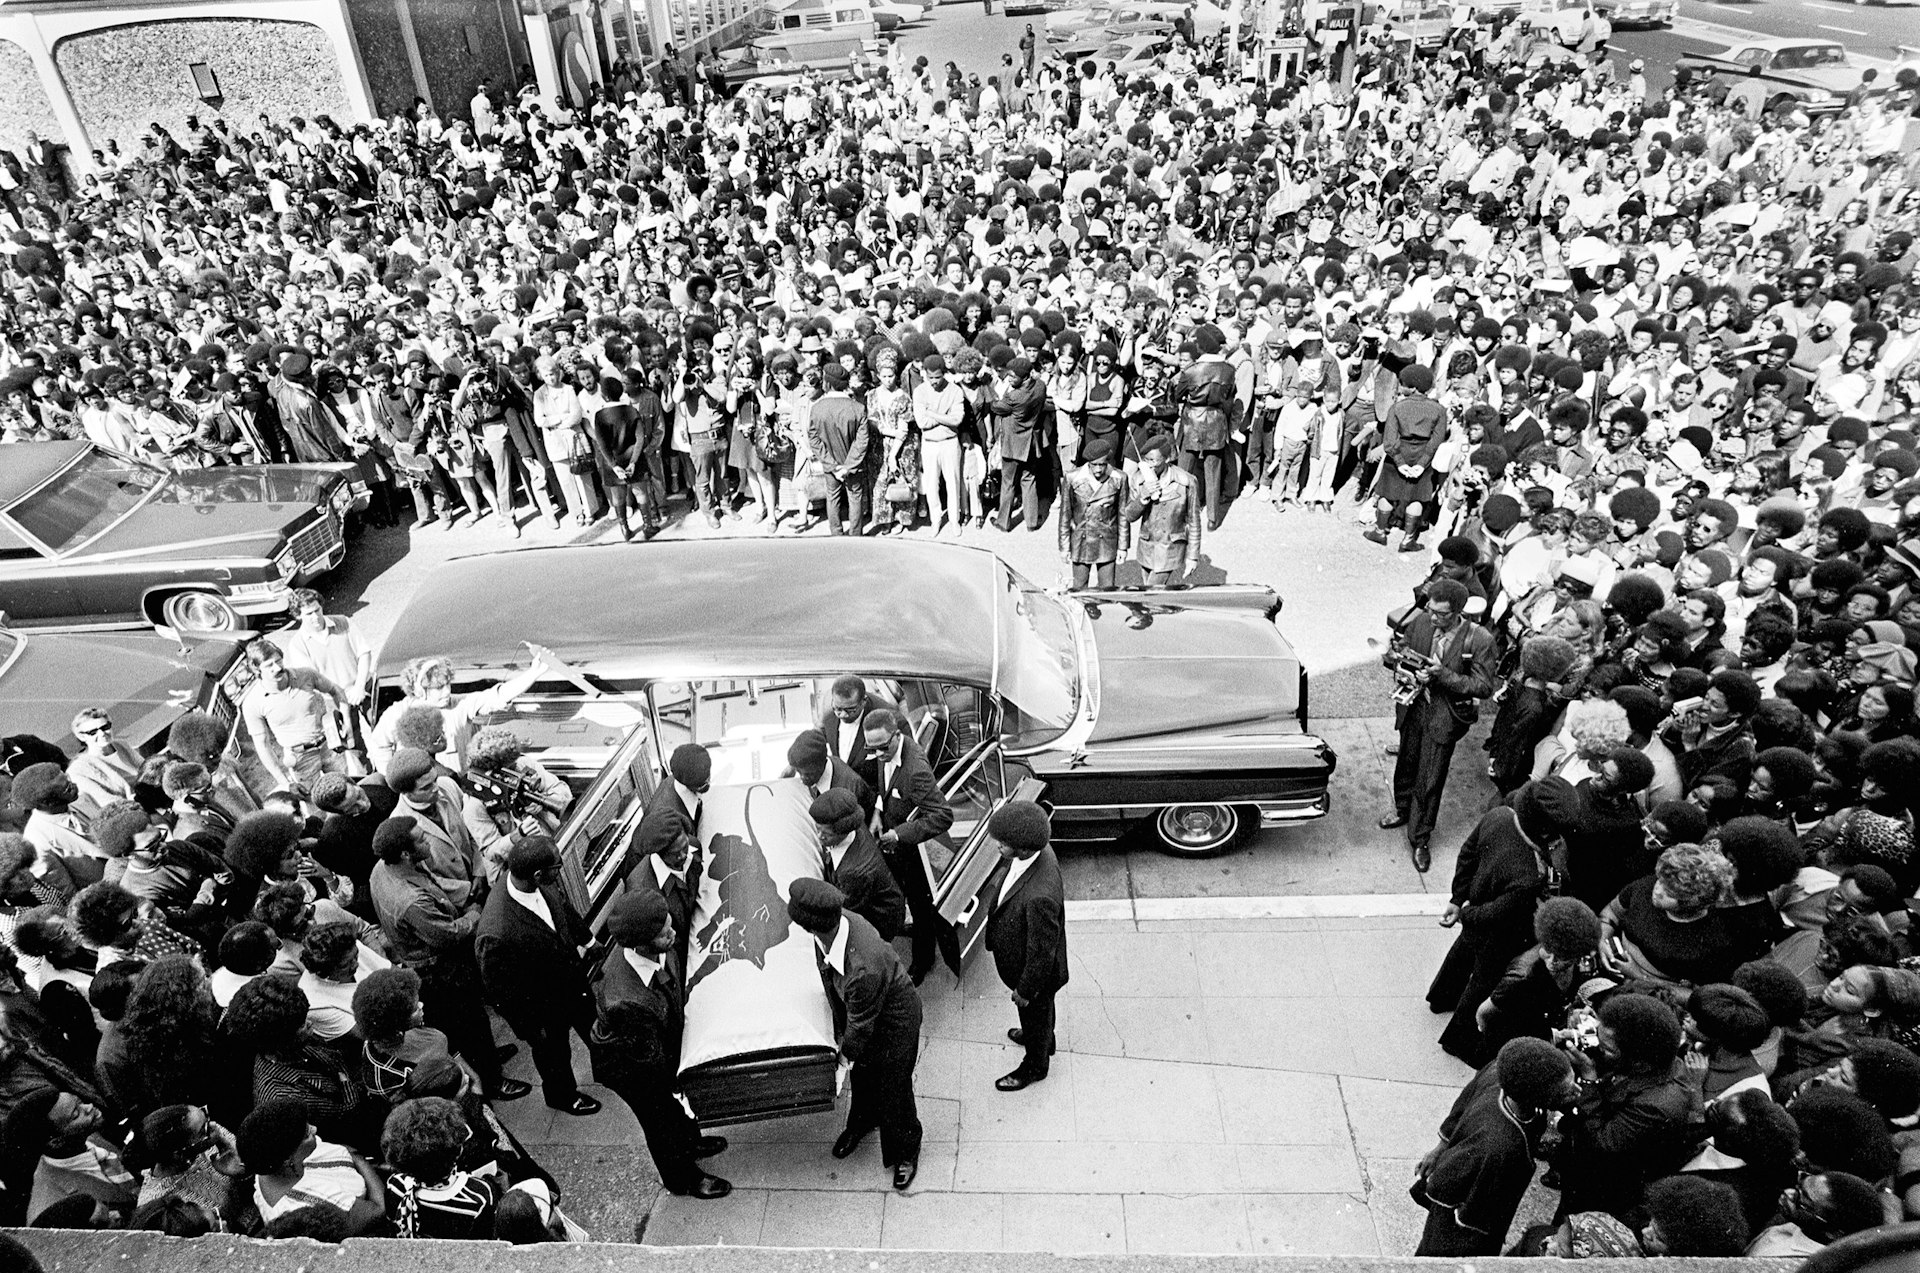 George Jackson’s coffin carried into St. Augustine’s Episcopal Church, Oakland, August 28, 1971